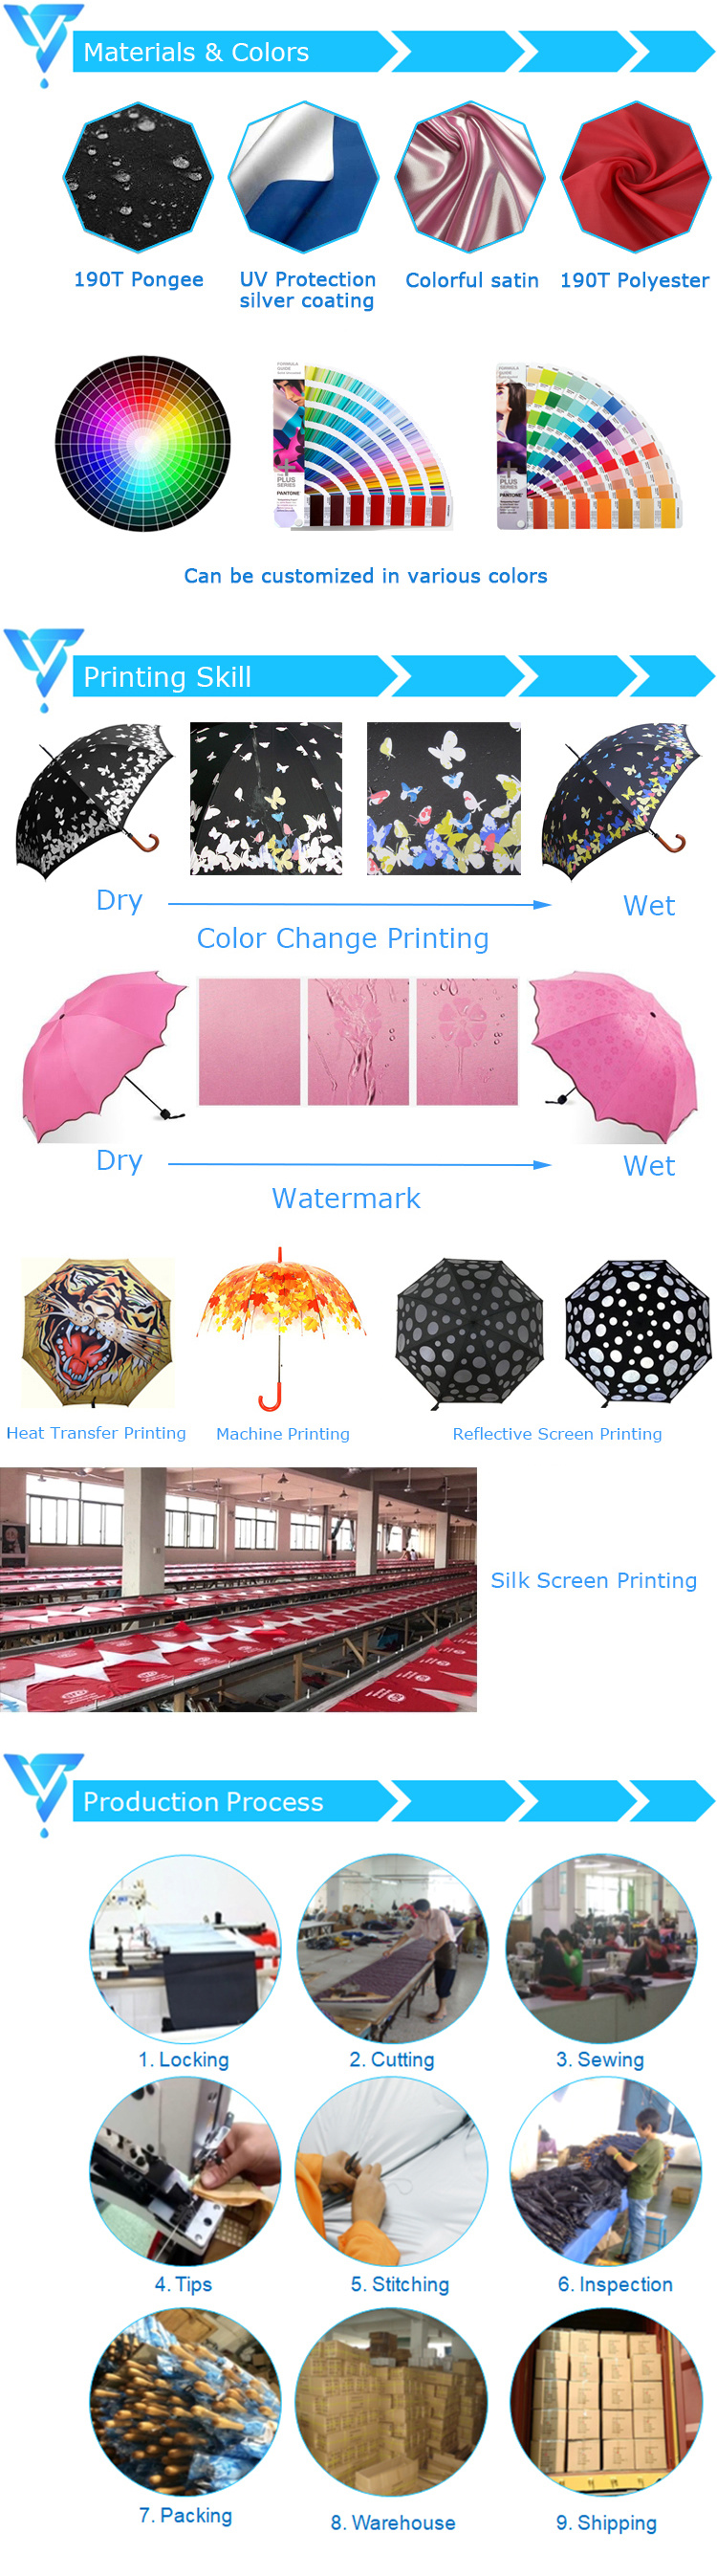 Perfectly Dimensioned Stay Dry Elegently Block The Rain Eye Catching Design Umbrella